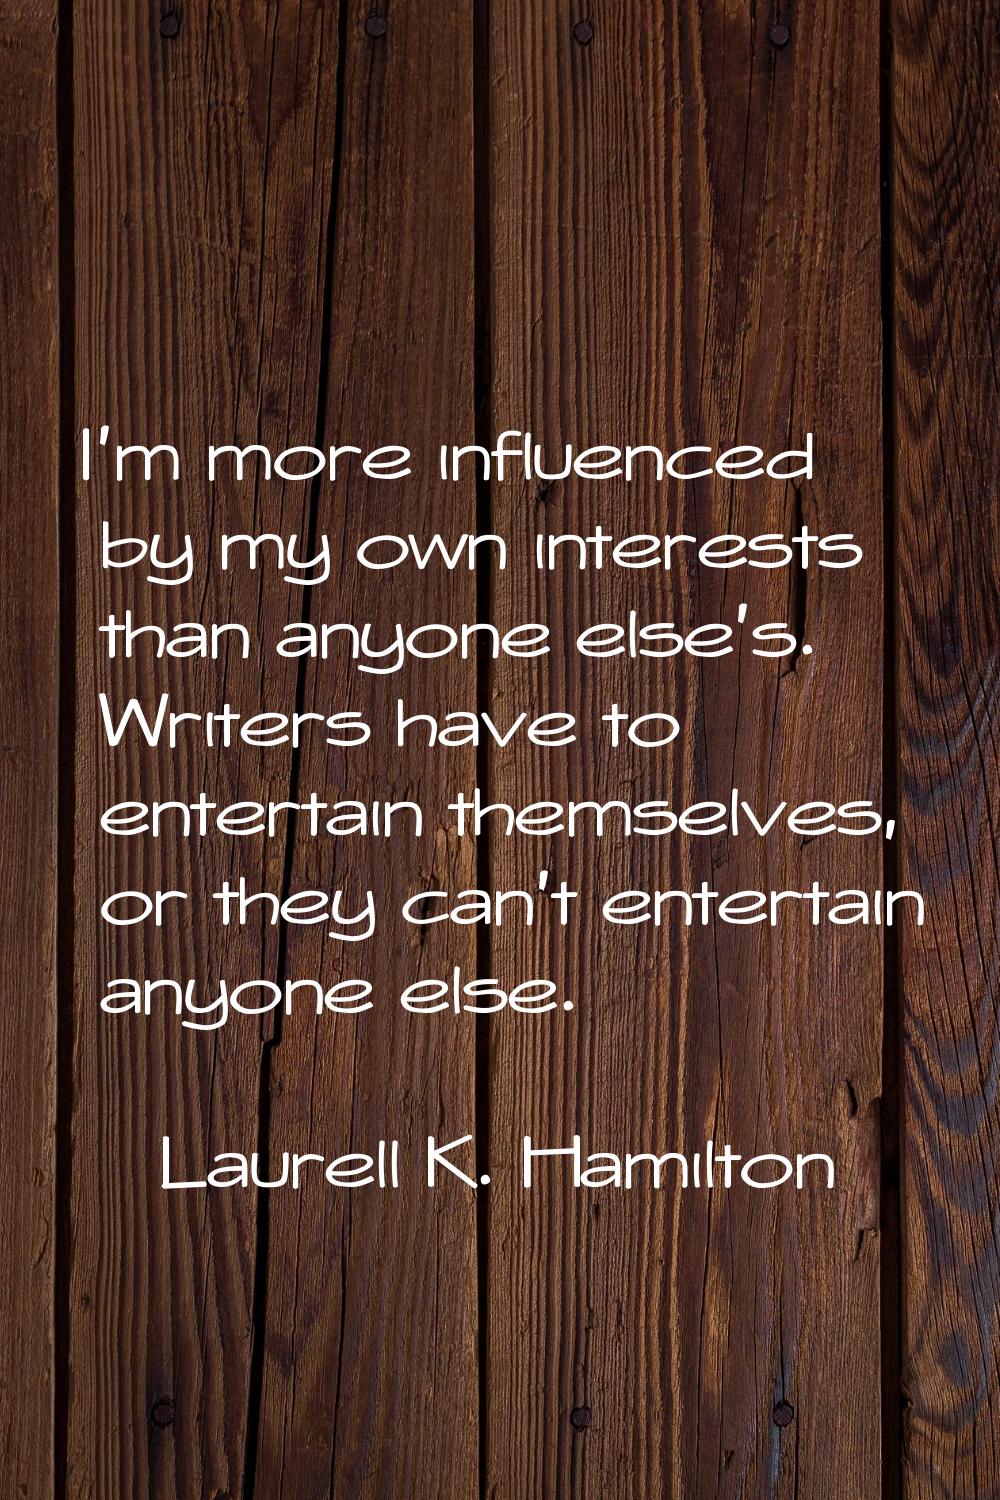 I'm more influenced by my own interests than anyone else's. Writers have to entertain themselves, o